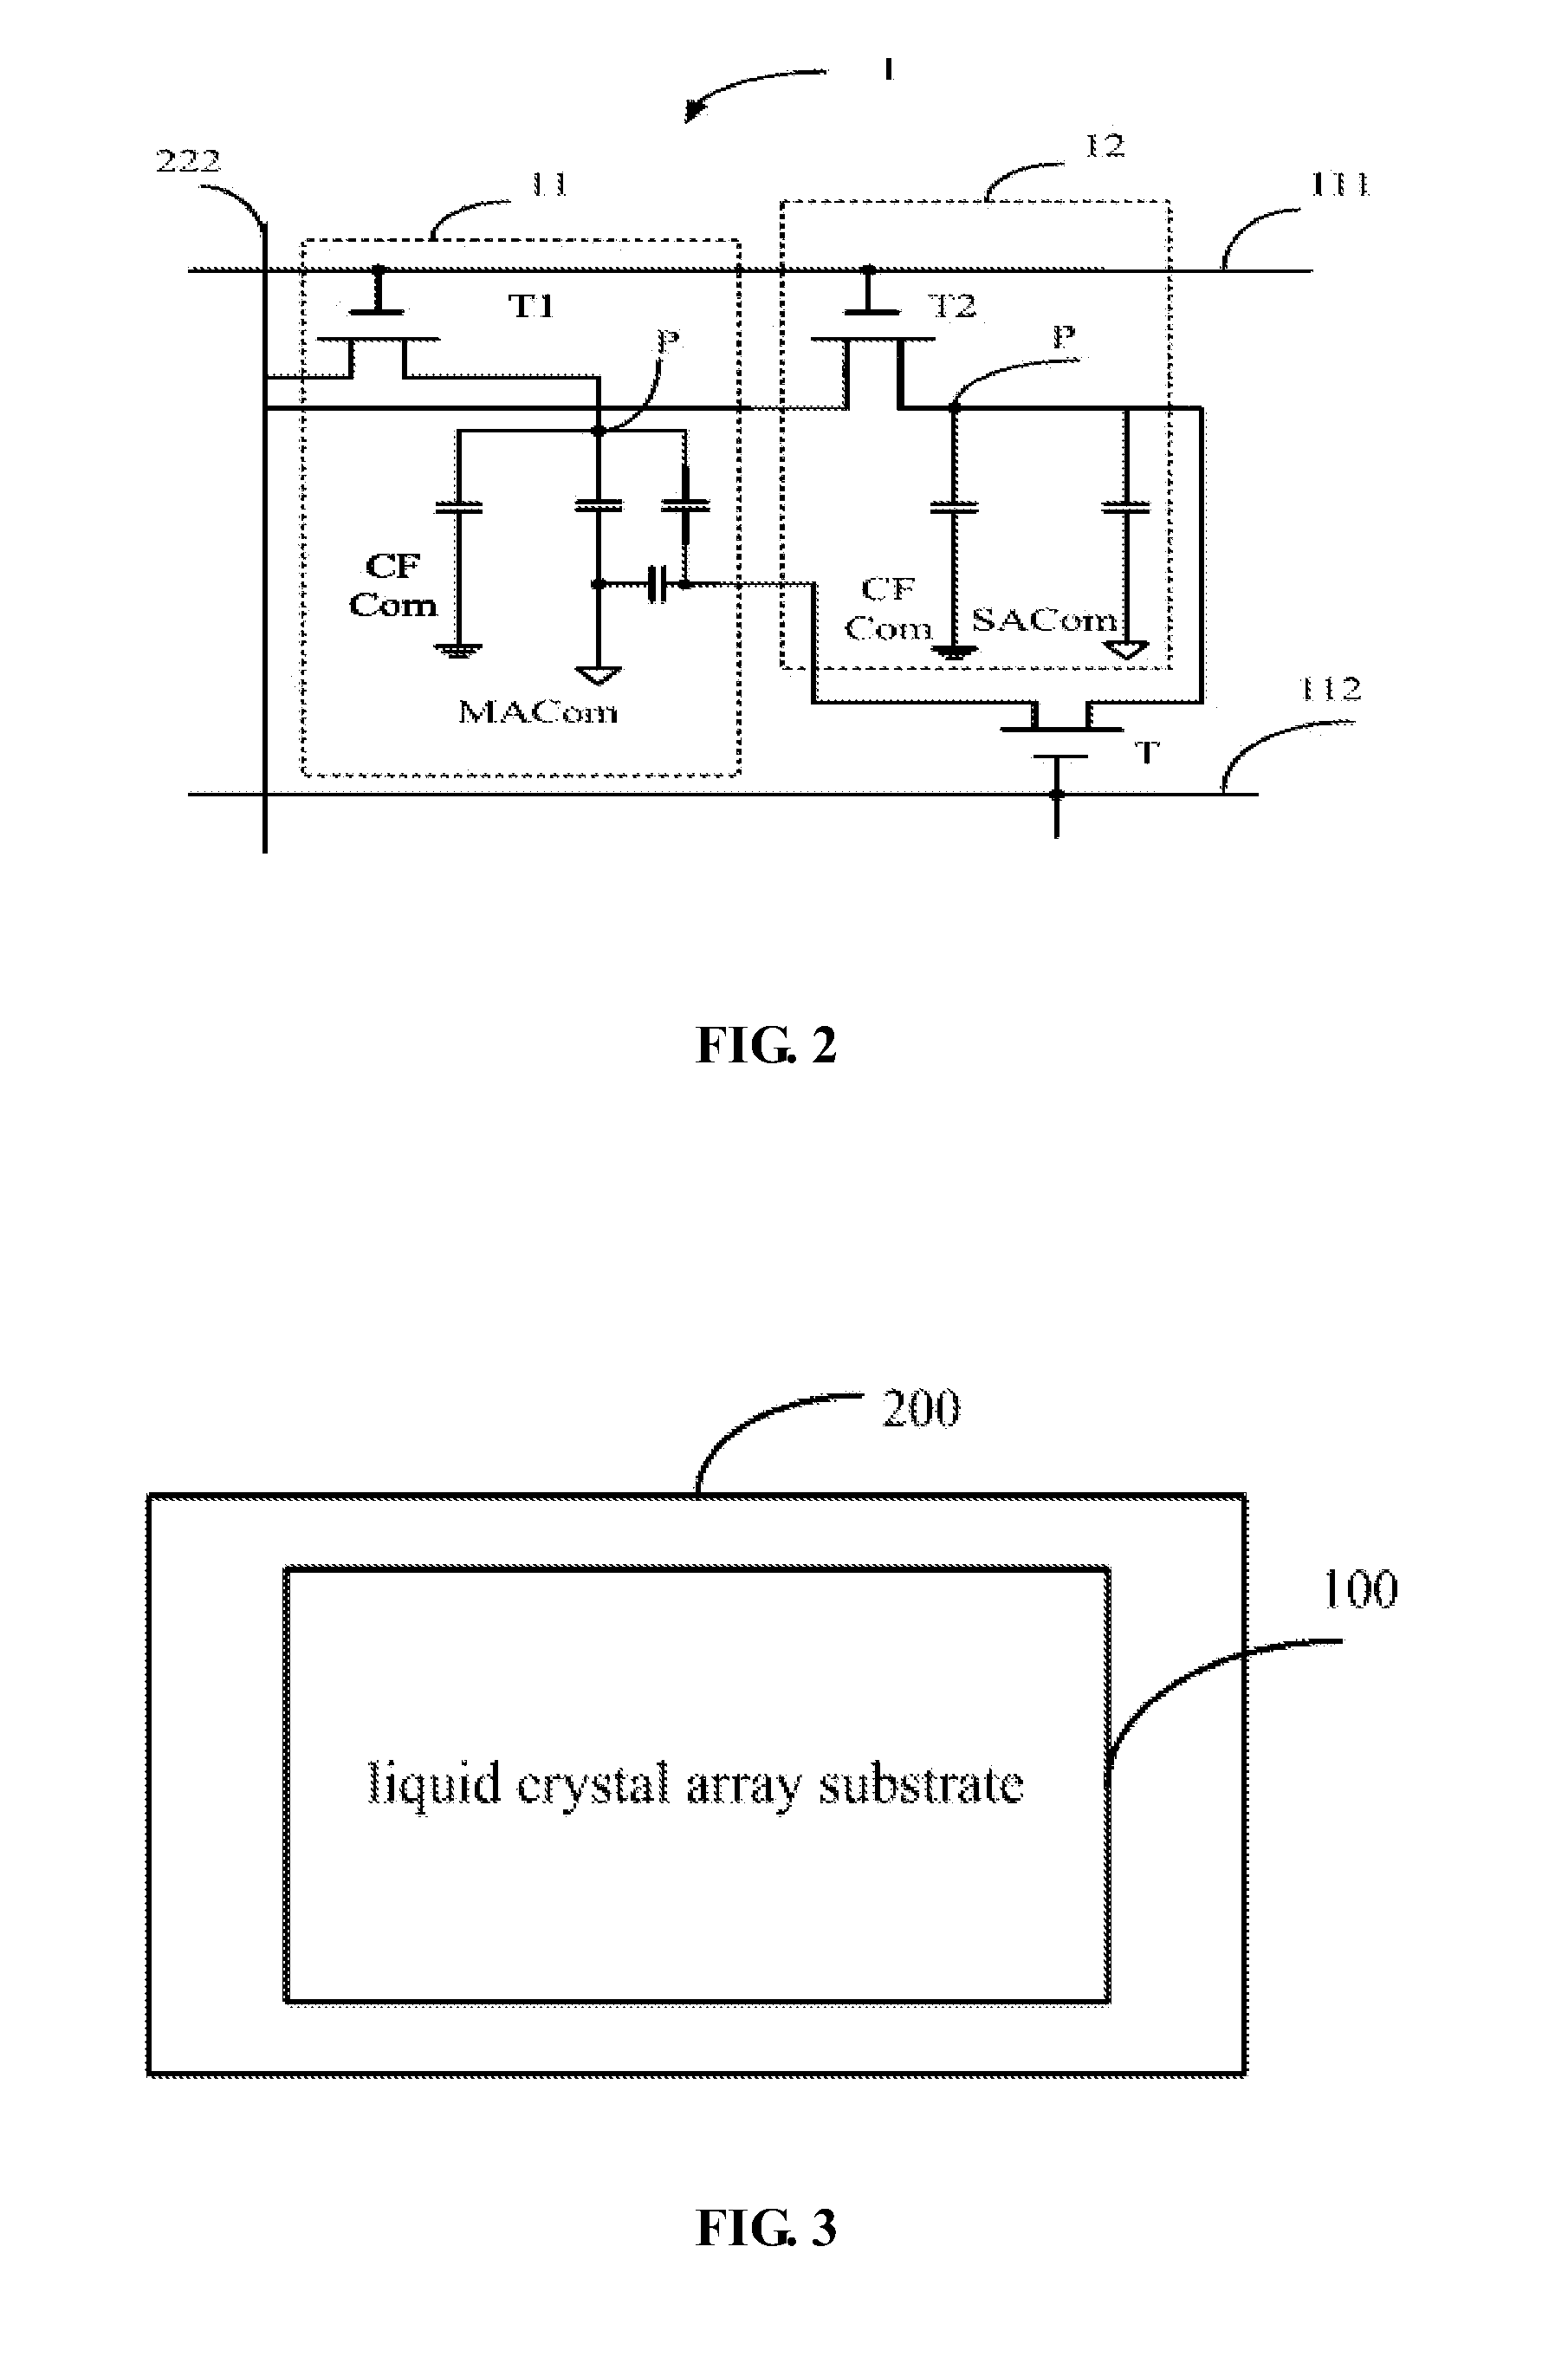 Liquid crystal array substrate, electronic device, and method for testing liquid crystal array substrate